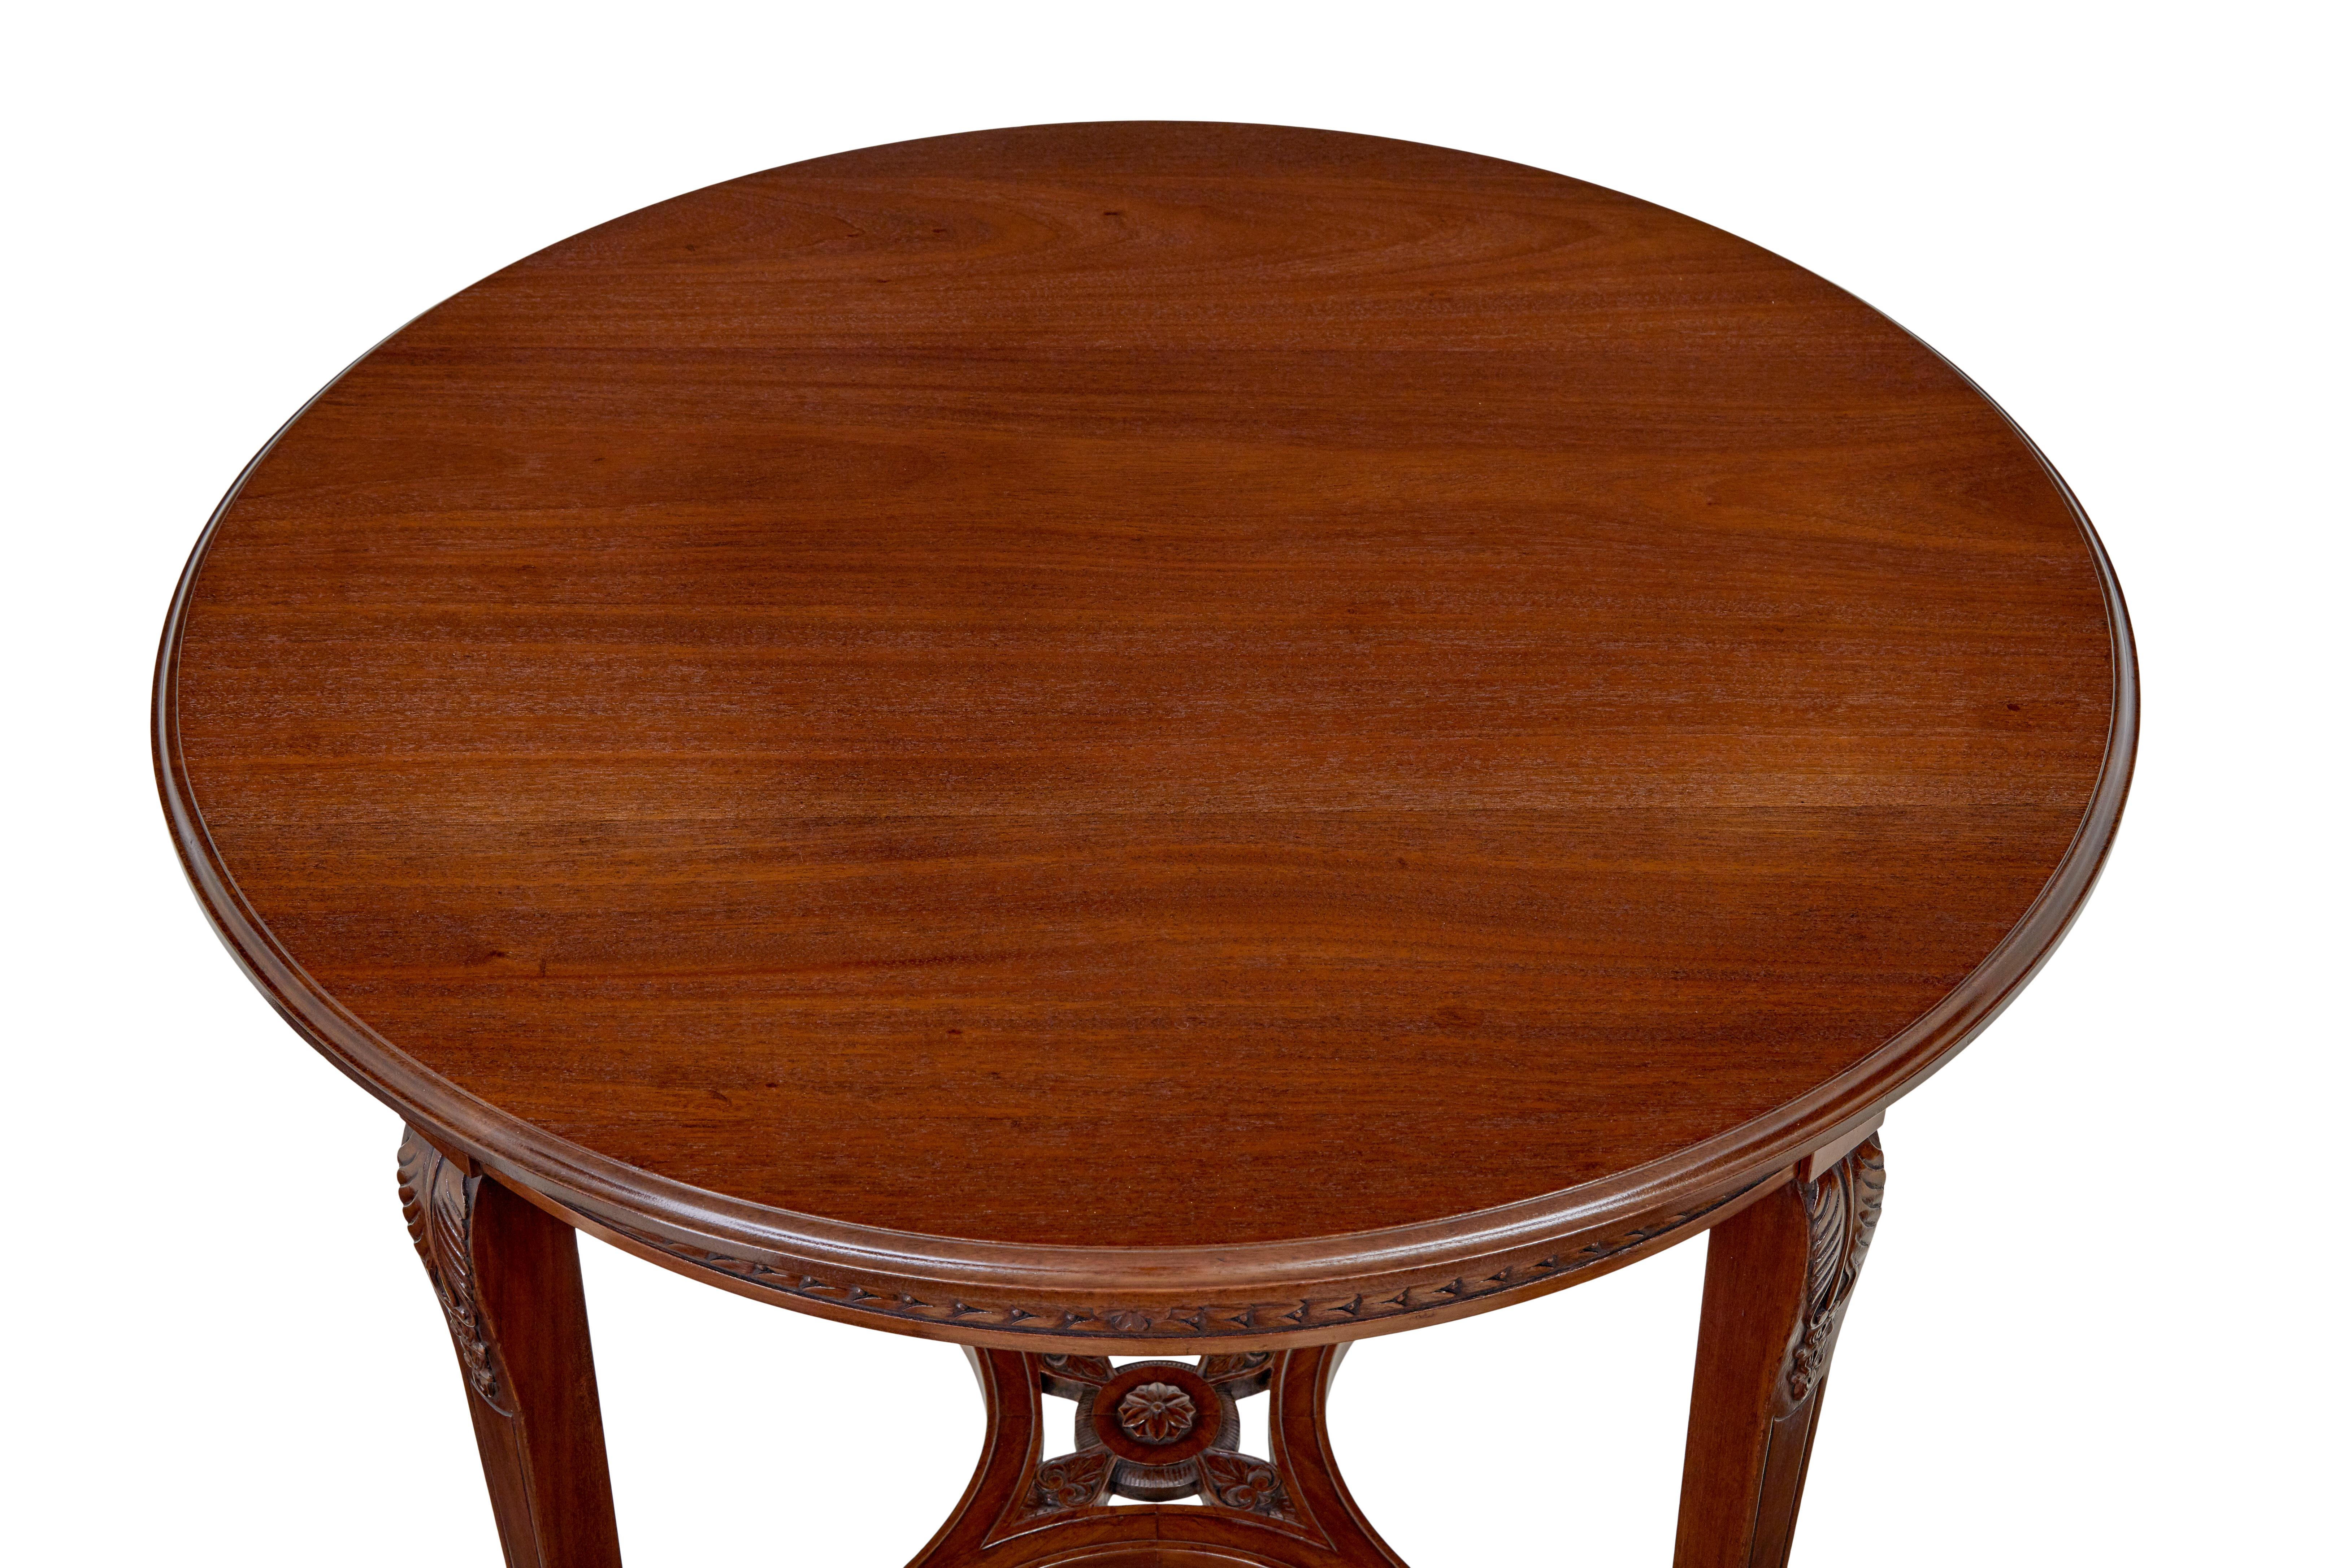 Early 20th century mahogany round center table circa 1920.

Good quality multi purpose table for around the home, round 3 plank top with molded edge.  Decorated with carved leaves around the apron and roundels on each quarter ( 1 missing roundel as